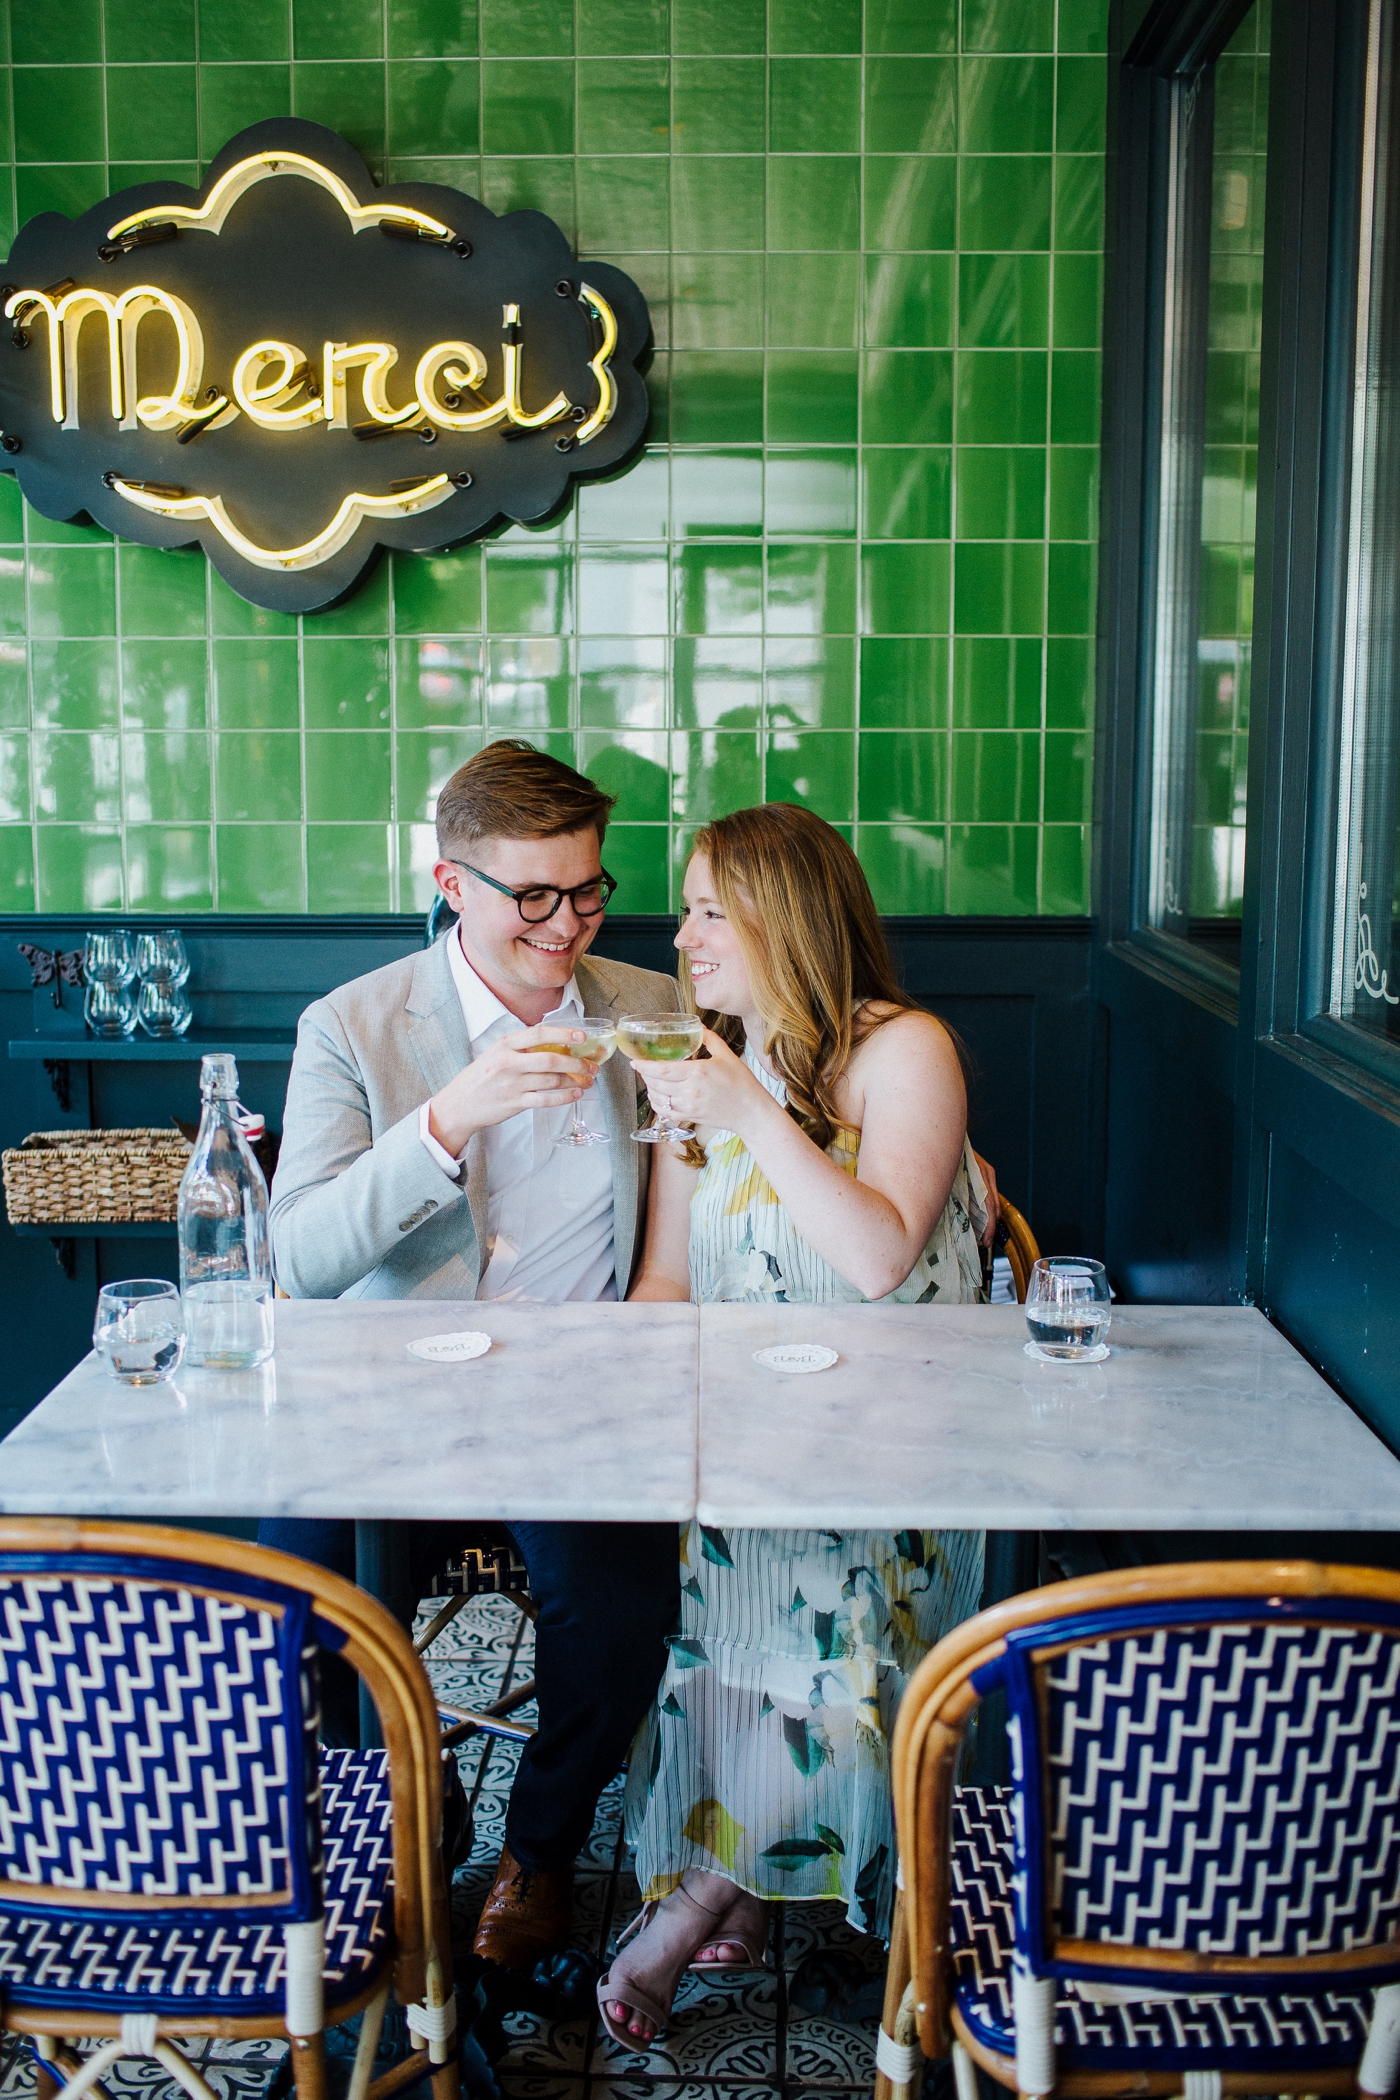 Maddie & Henry’s Engagement Session at The Bread and the Butterfly Café in Atlanta by Izzy & Co.